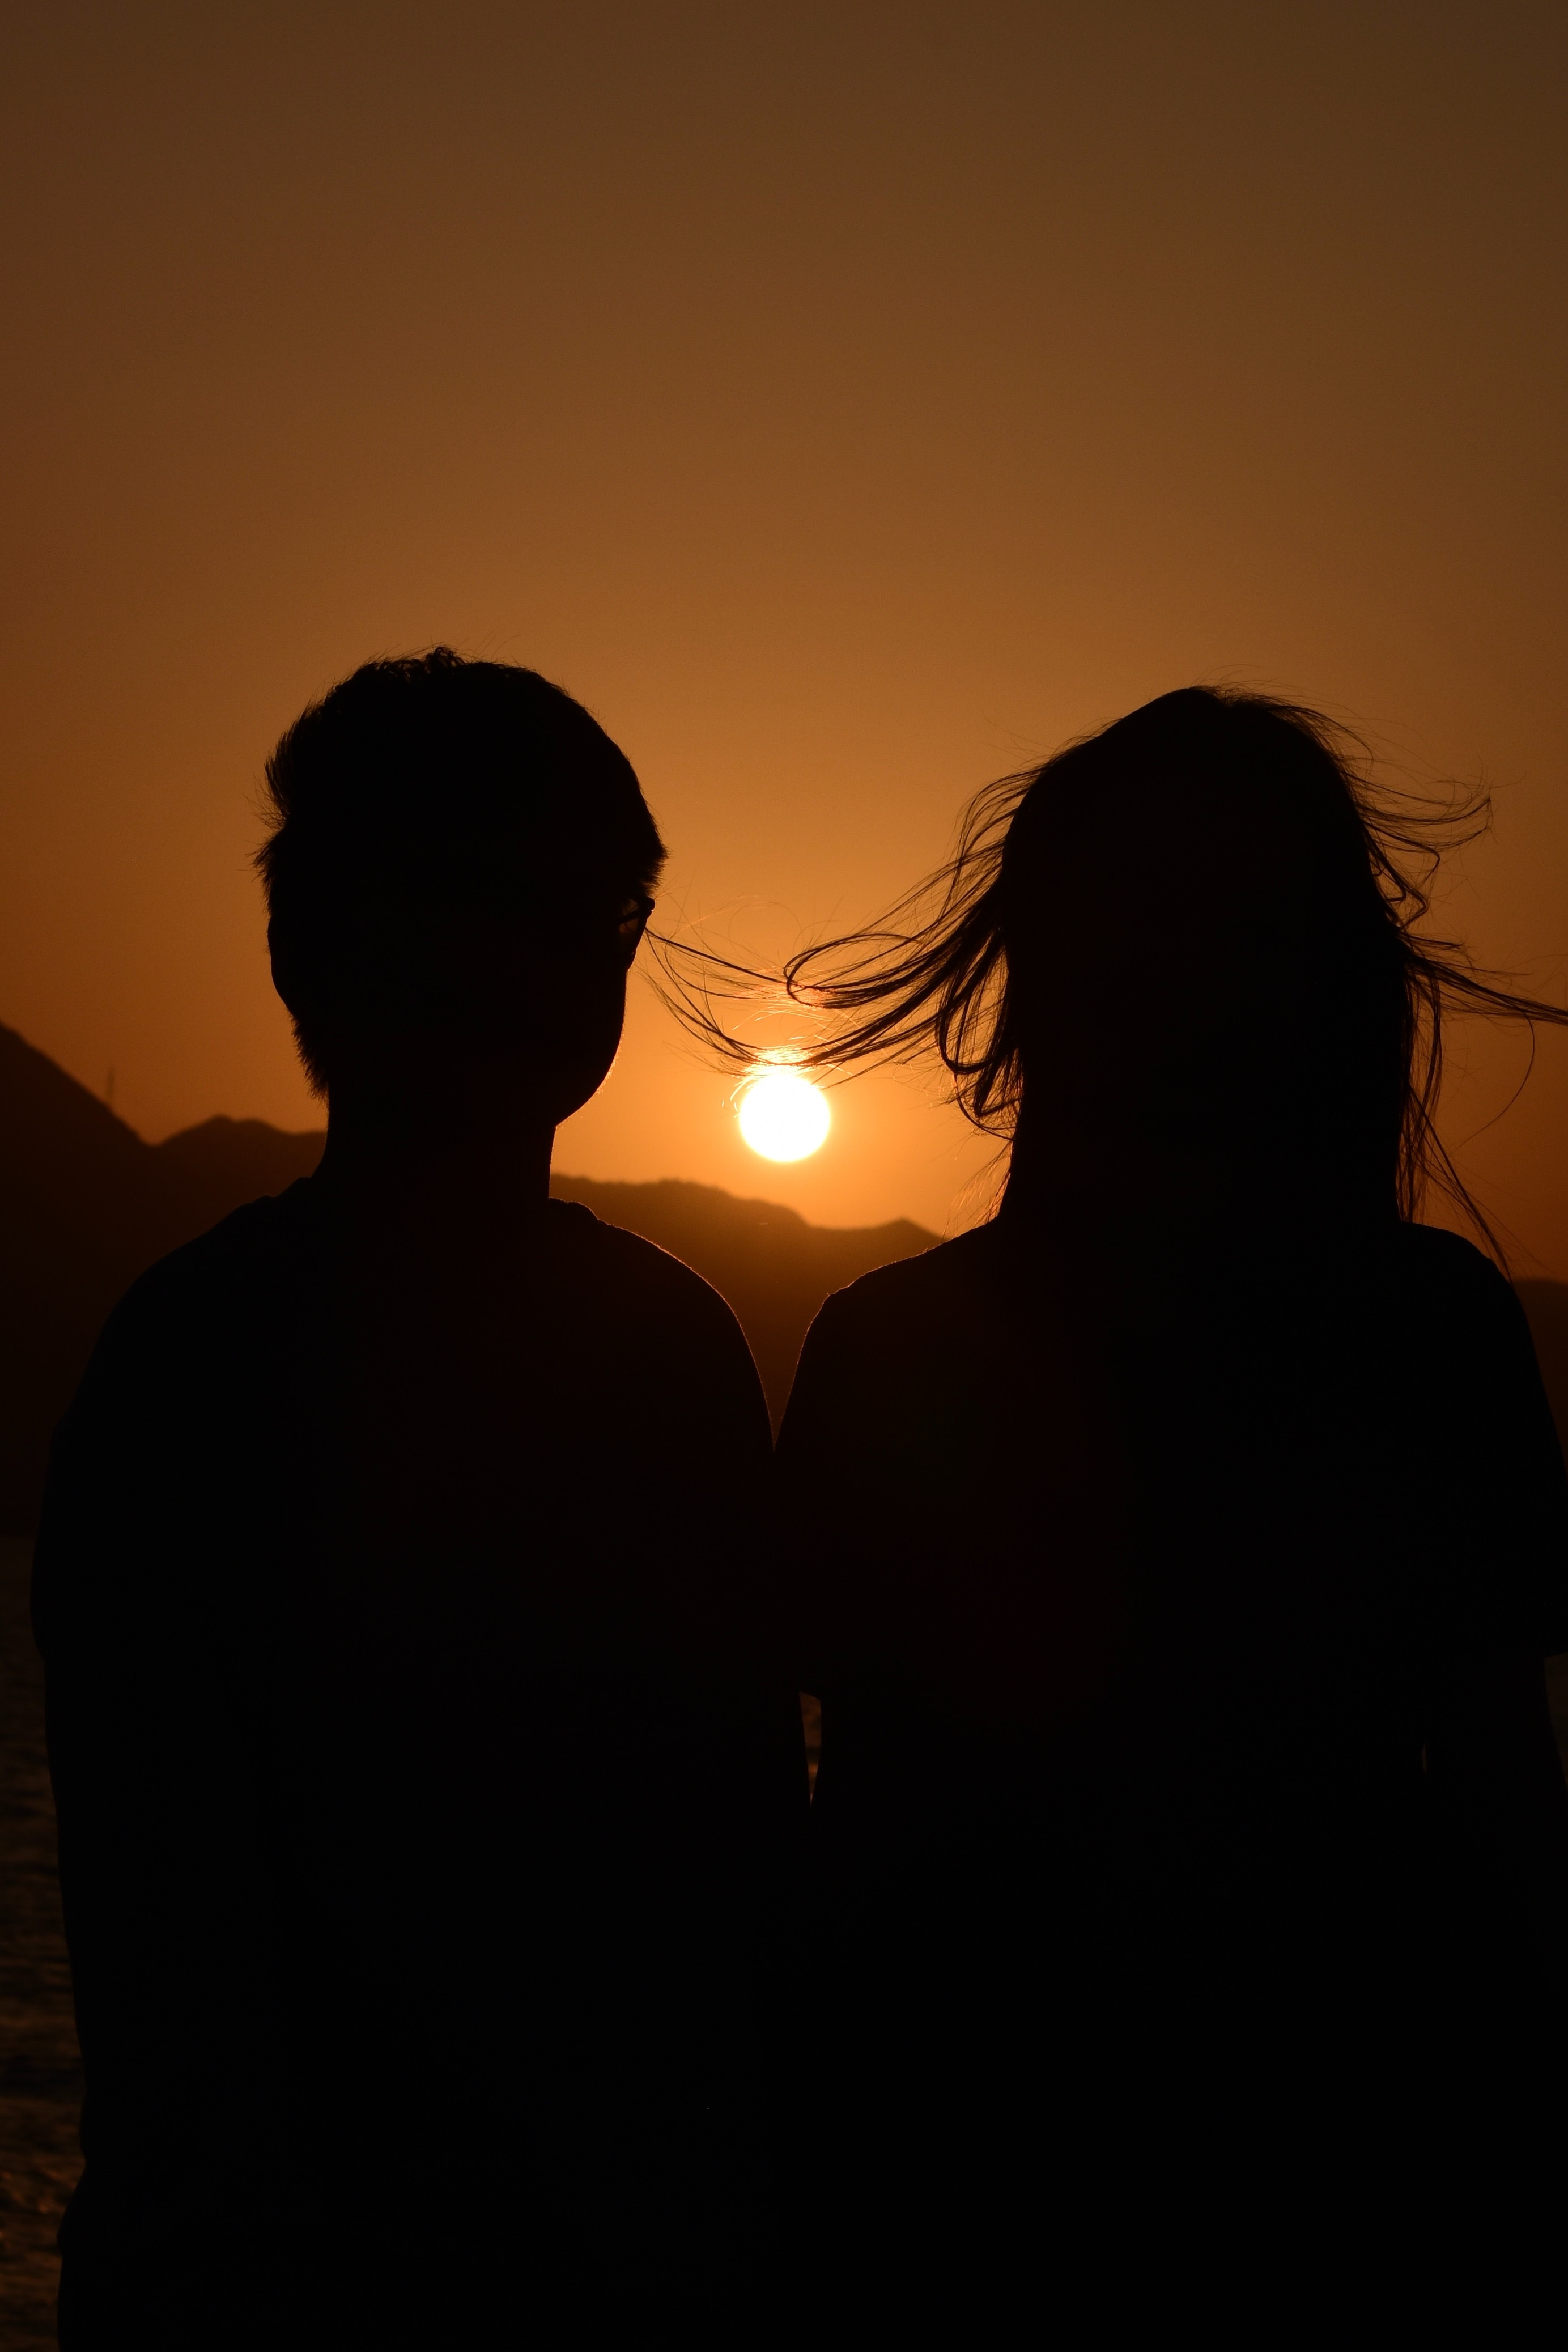 A couple in front of a sunset. | Source: Pexels